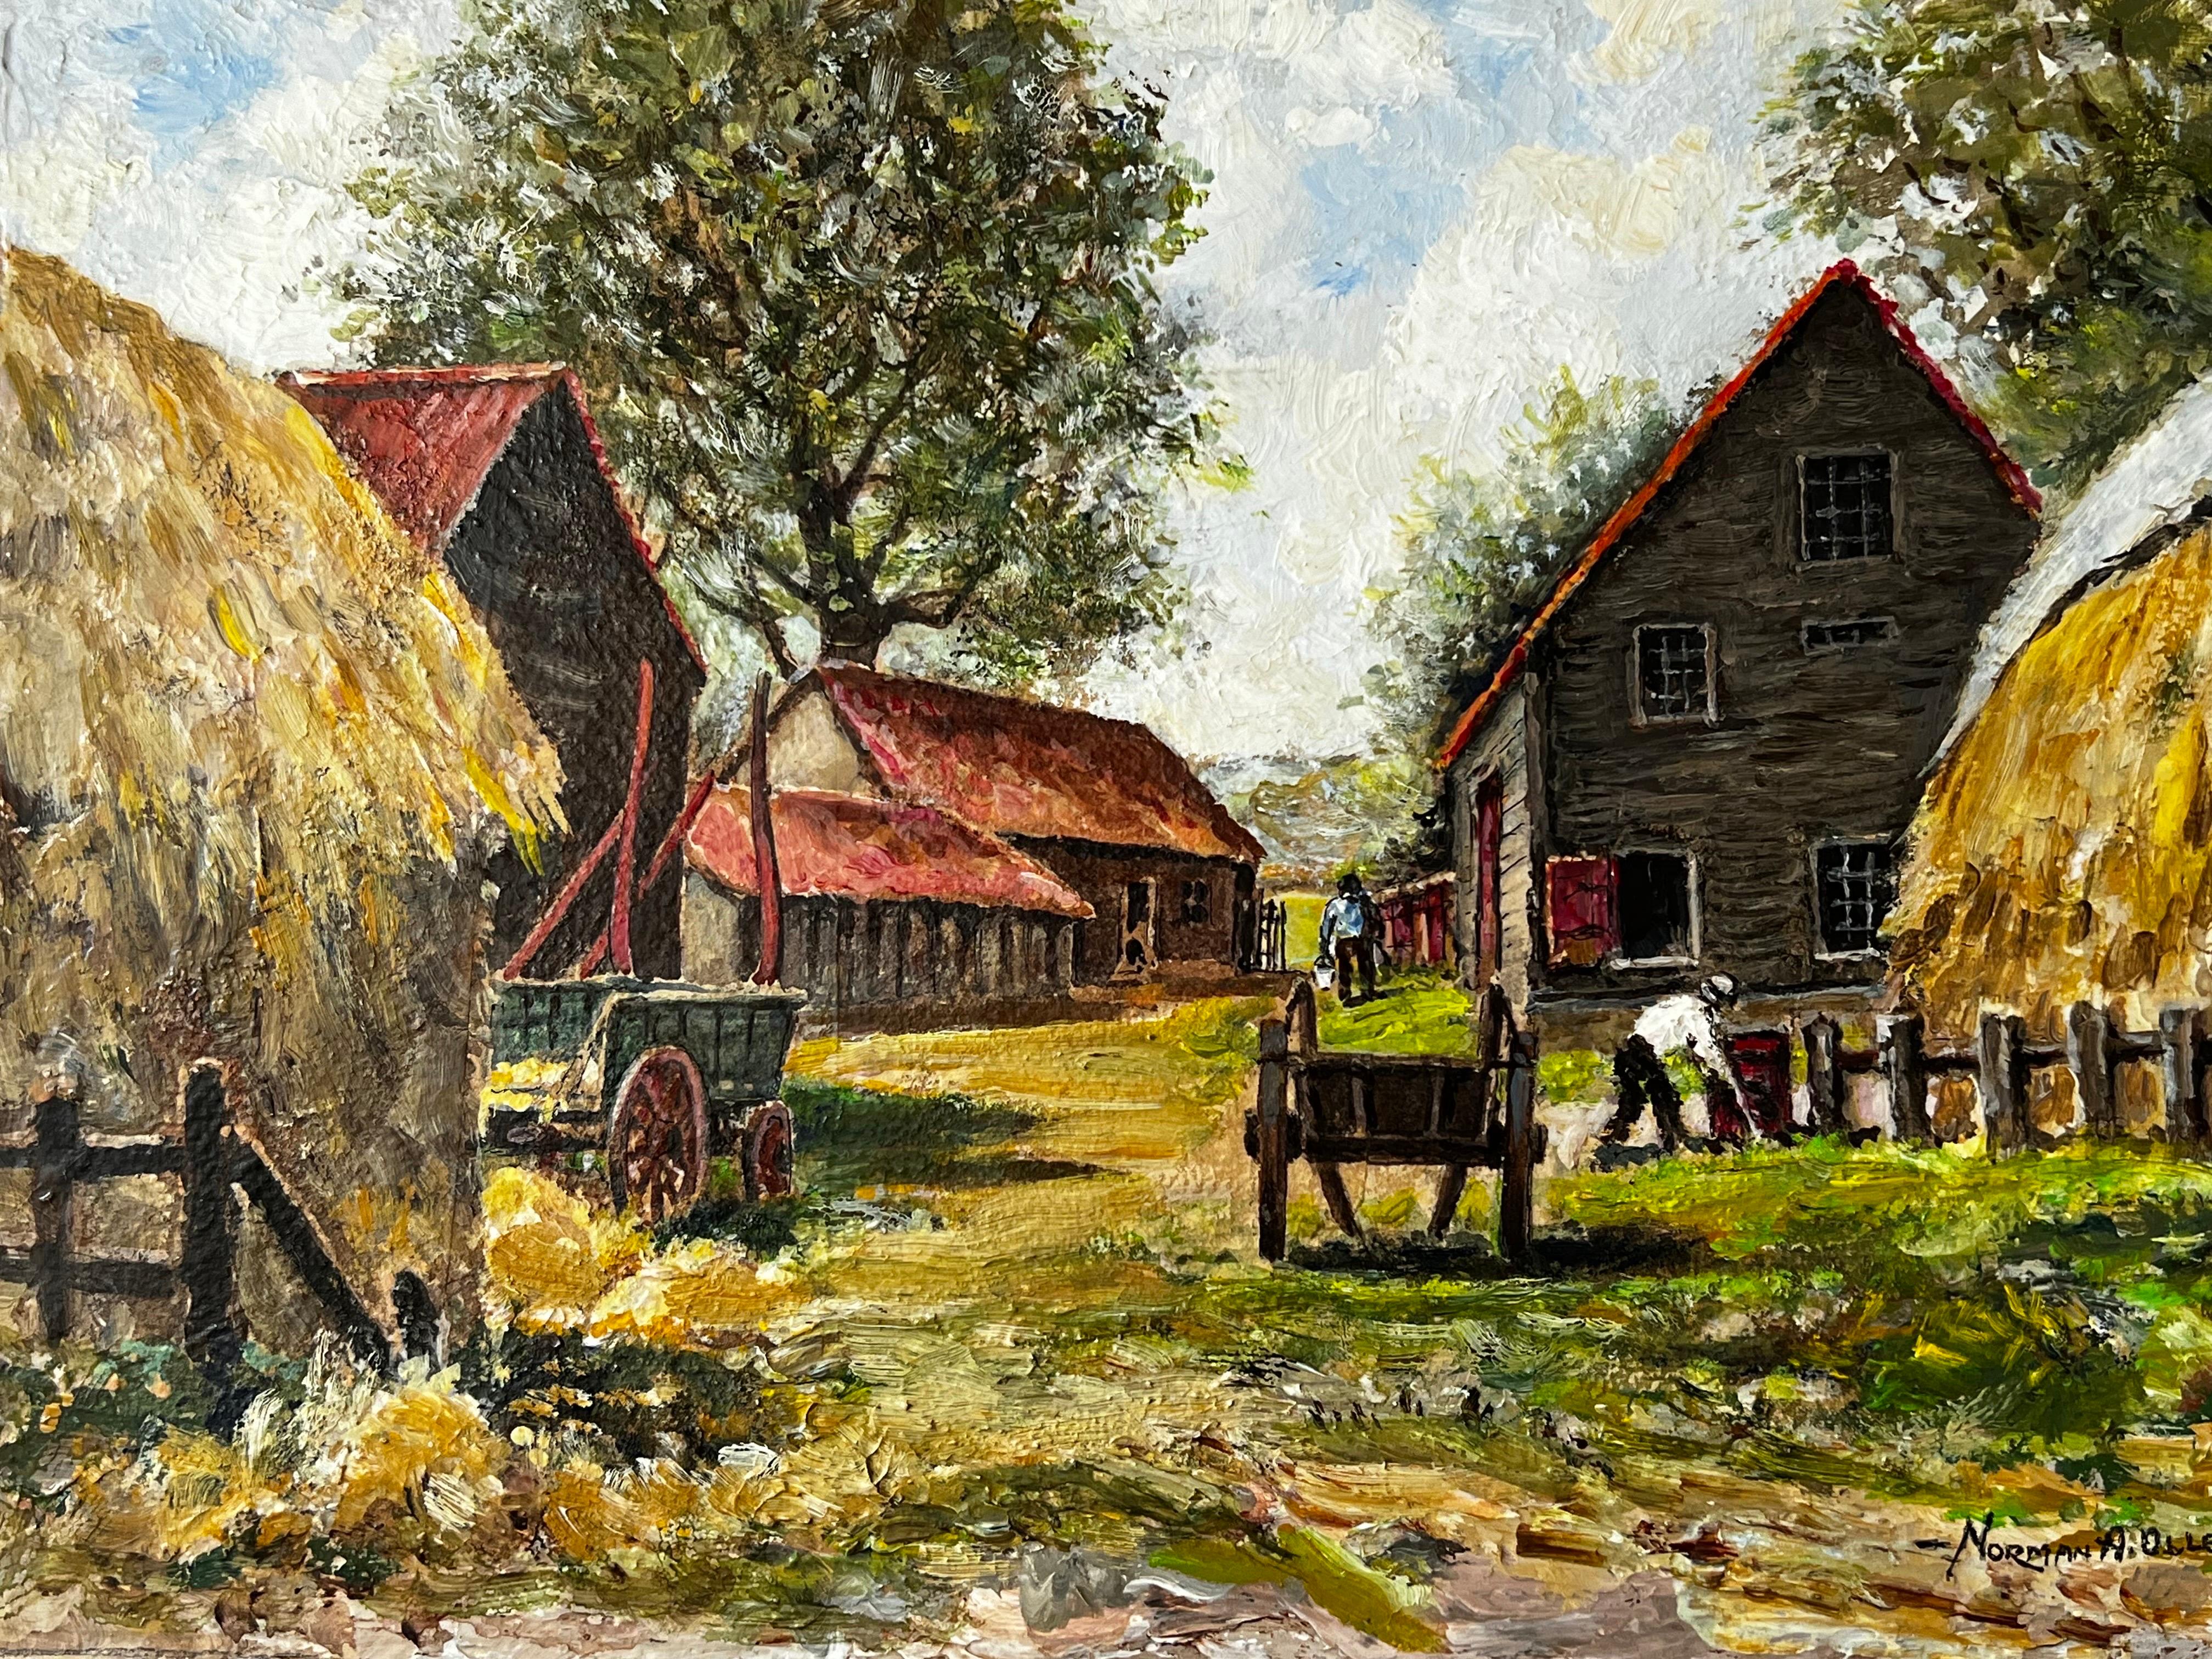 Surrey Farmyard Of Farmers At Work - British Landscape - Painting by Norman A Olley